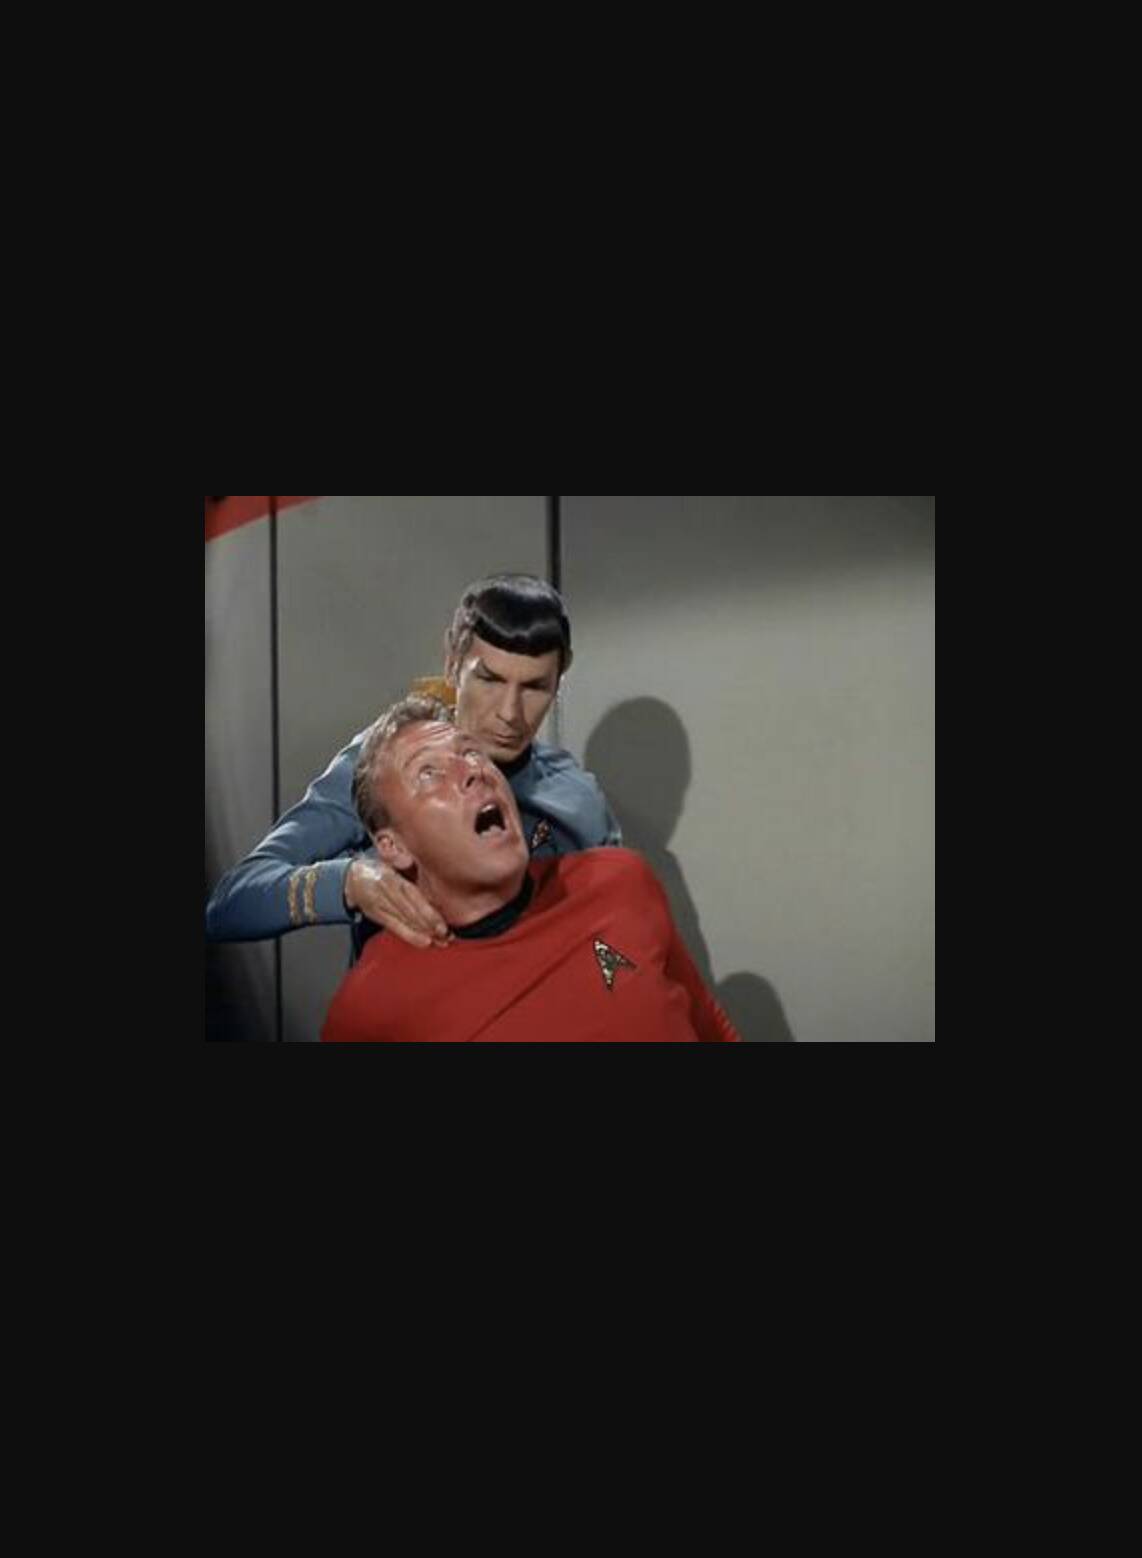 <p>Leonard Nimoy was a method actor before his role as Spock in the TV series. Nimoy is credited with inventing the Vulcan grip. This maneuver, performed by joining the fingers in a specific pattern and applying pressure to the neck, swiftly immobilized opponents. </p> <p>Affectionately dubbed the "Vulcan nerve pinch," it became a trademark move synonymous with Spock's logical and formidable nature.</p>